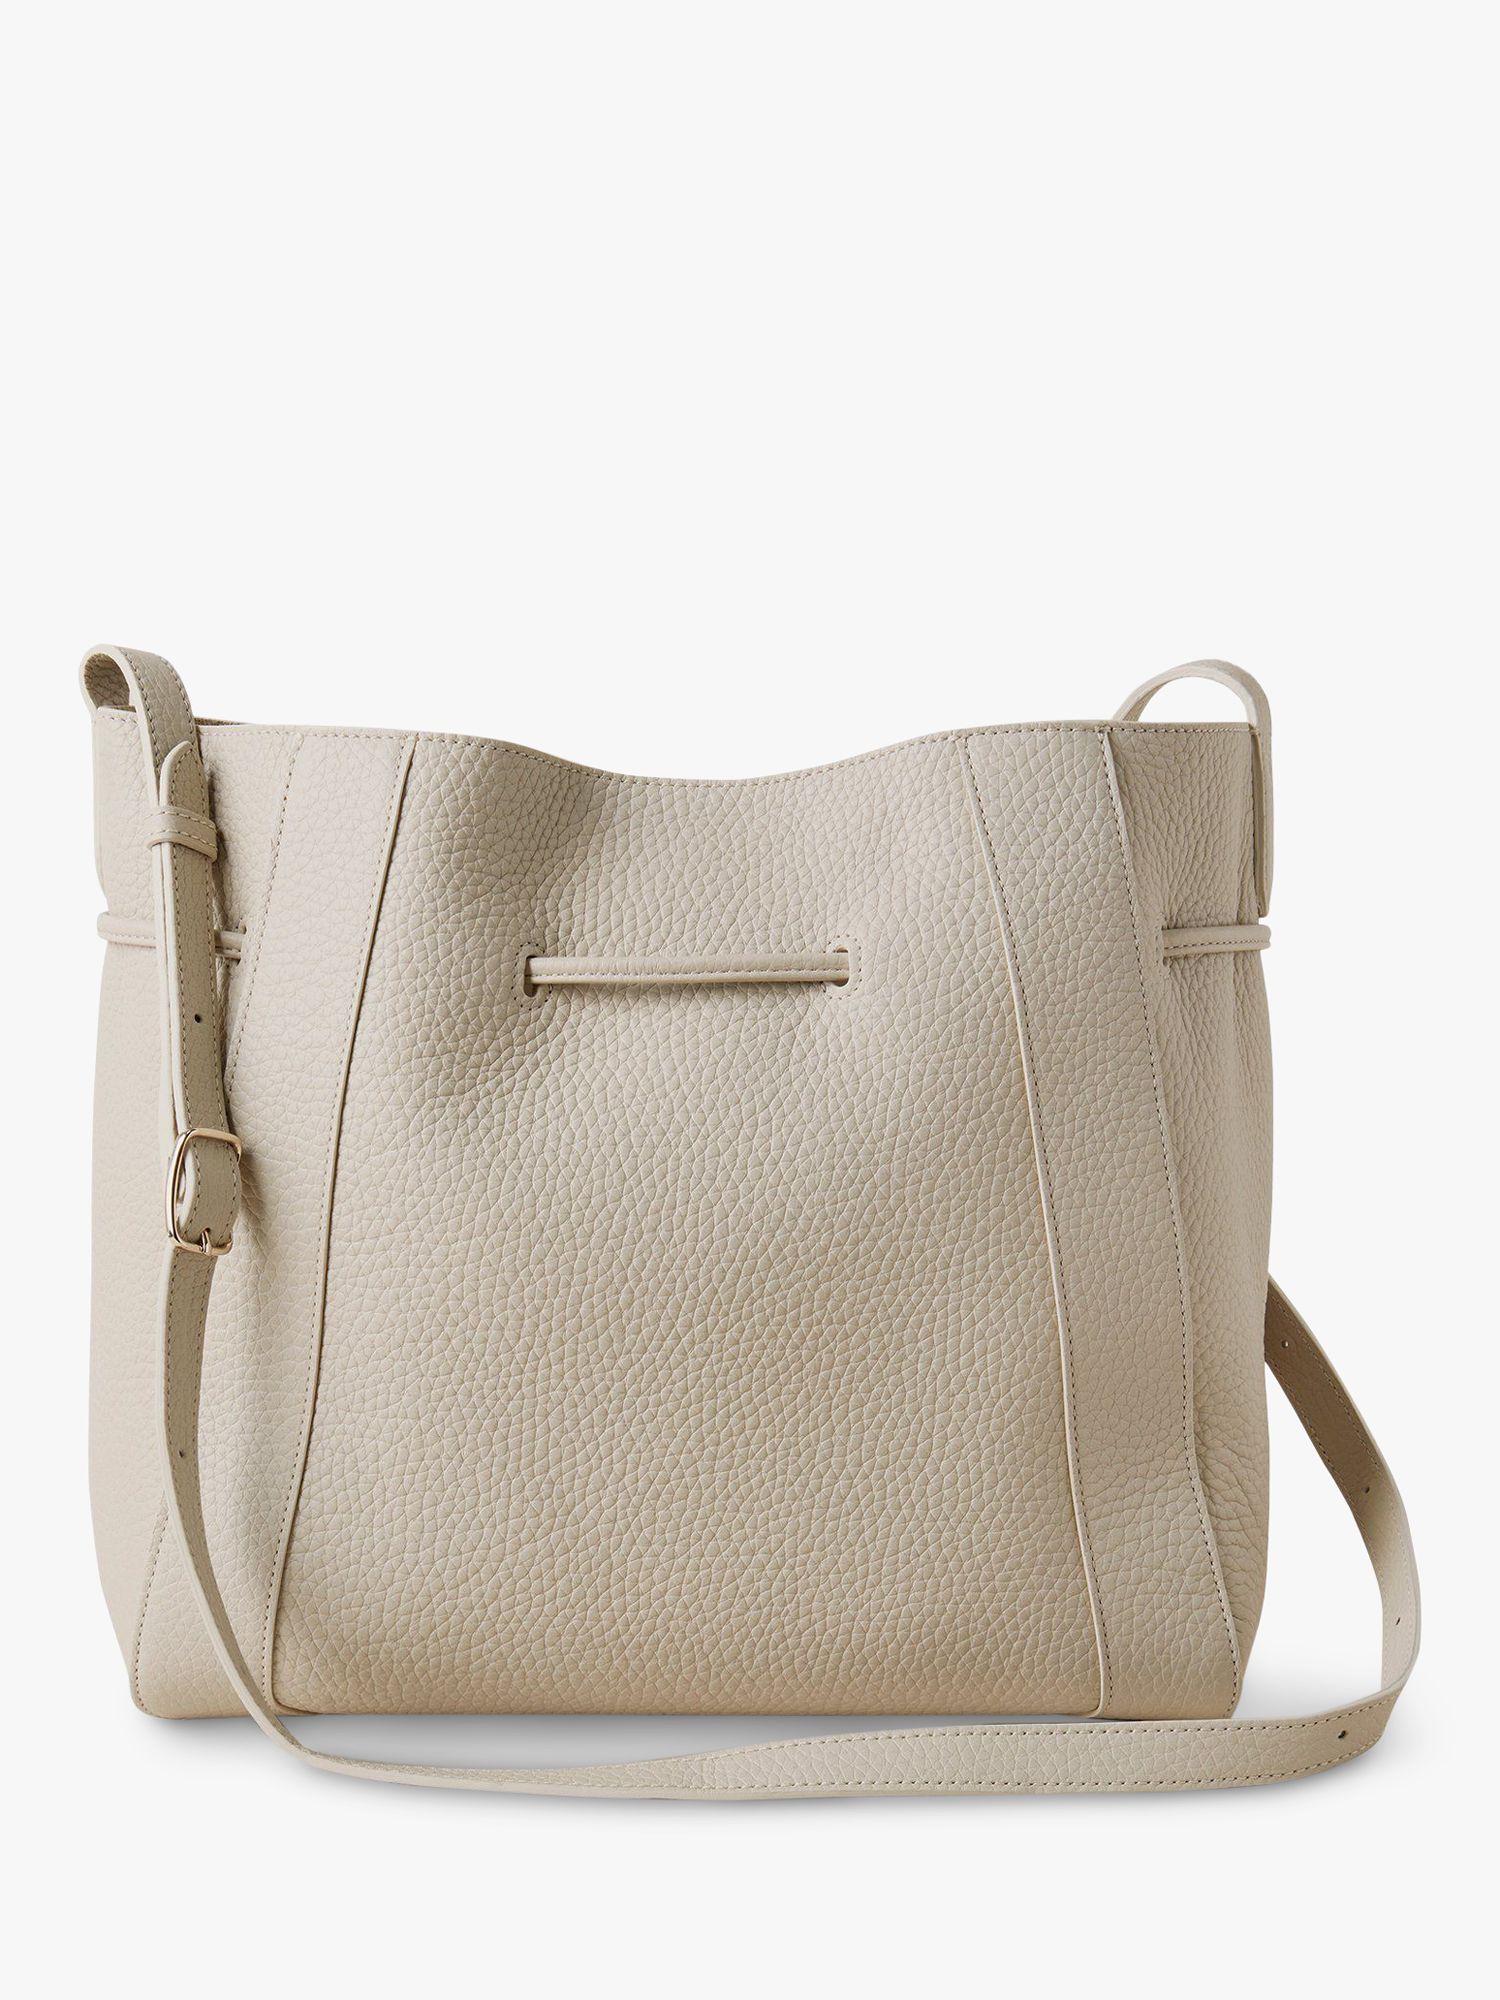 Mulberry Small Millie Heavy Grain Leather Tote Bag, Chalk at John Lewis ...